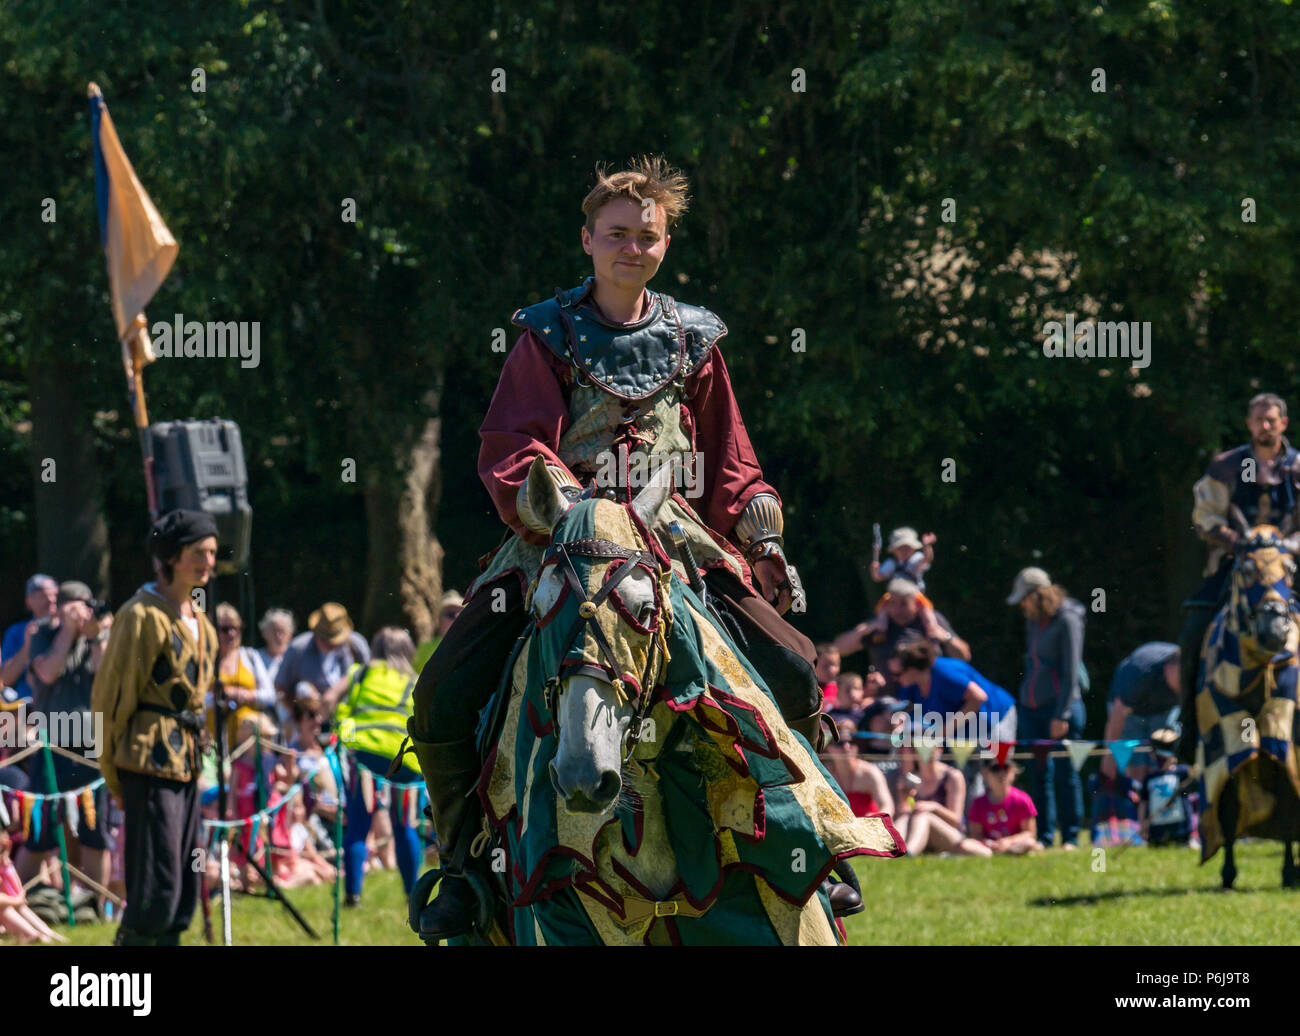 Jousting and Medieval Fair at Linlithgow Palace, Linlithgow, Scotland, United Kingdom, 30th June 2018. Historic Environment Scotland kick off their summer entertainment programme with a fabulous display of Medieval jousting in the grounds of the historic castle. The jousting is performed by Les Amis D'Onno equine stunt team based in the Borders. A knight rides a horse Stock Photo